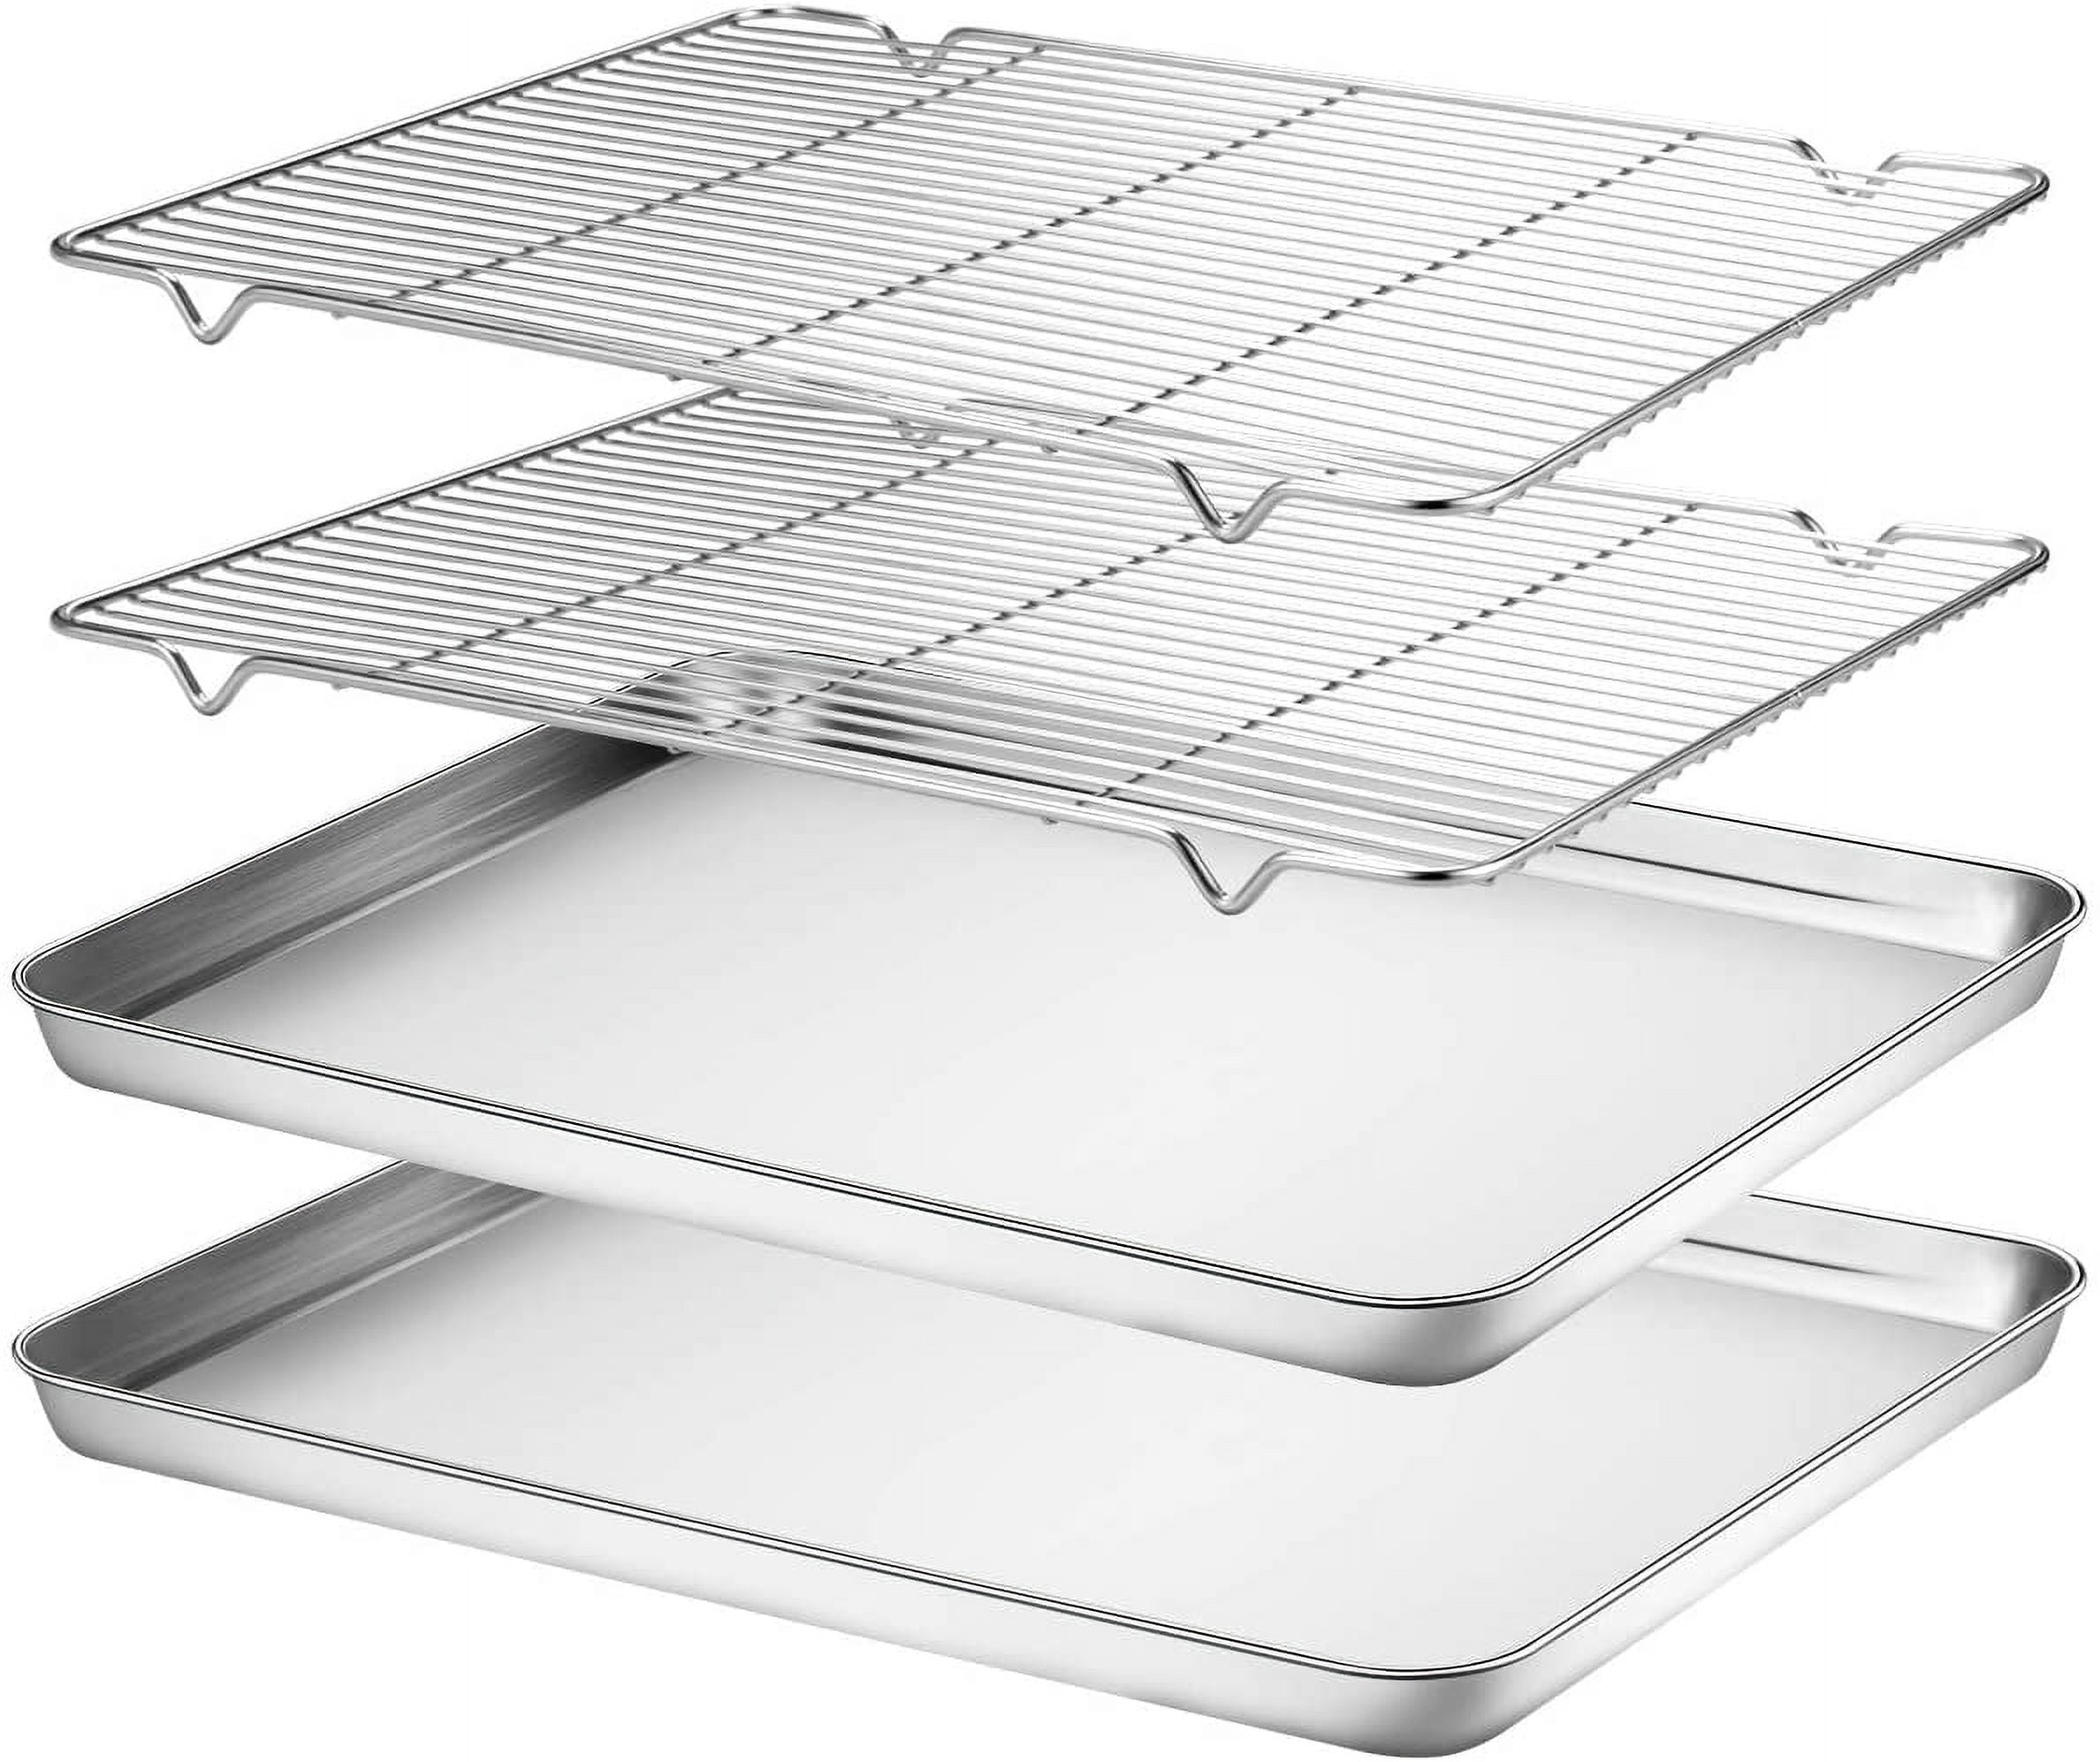 Wildone Baking Sheet Set of 2 - Stainless Steel Cookie Sheet Baking Pan,  Size 18 x 13 x 1 inch, Non Toxic & Heavy Duty & Mirror Finish & Rust Free 